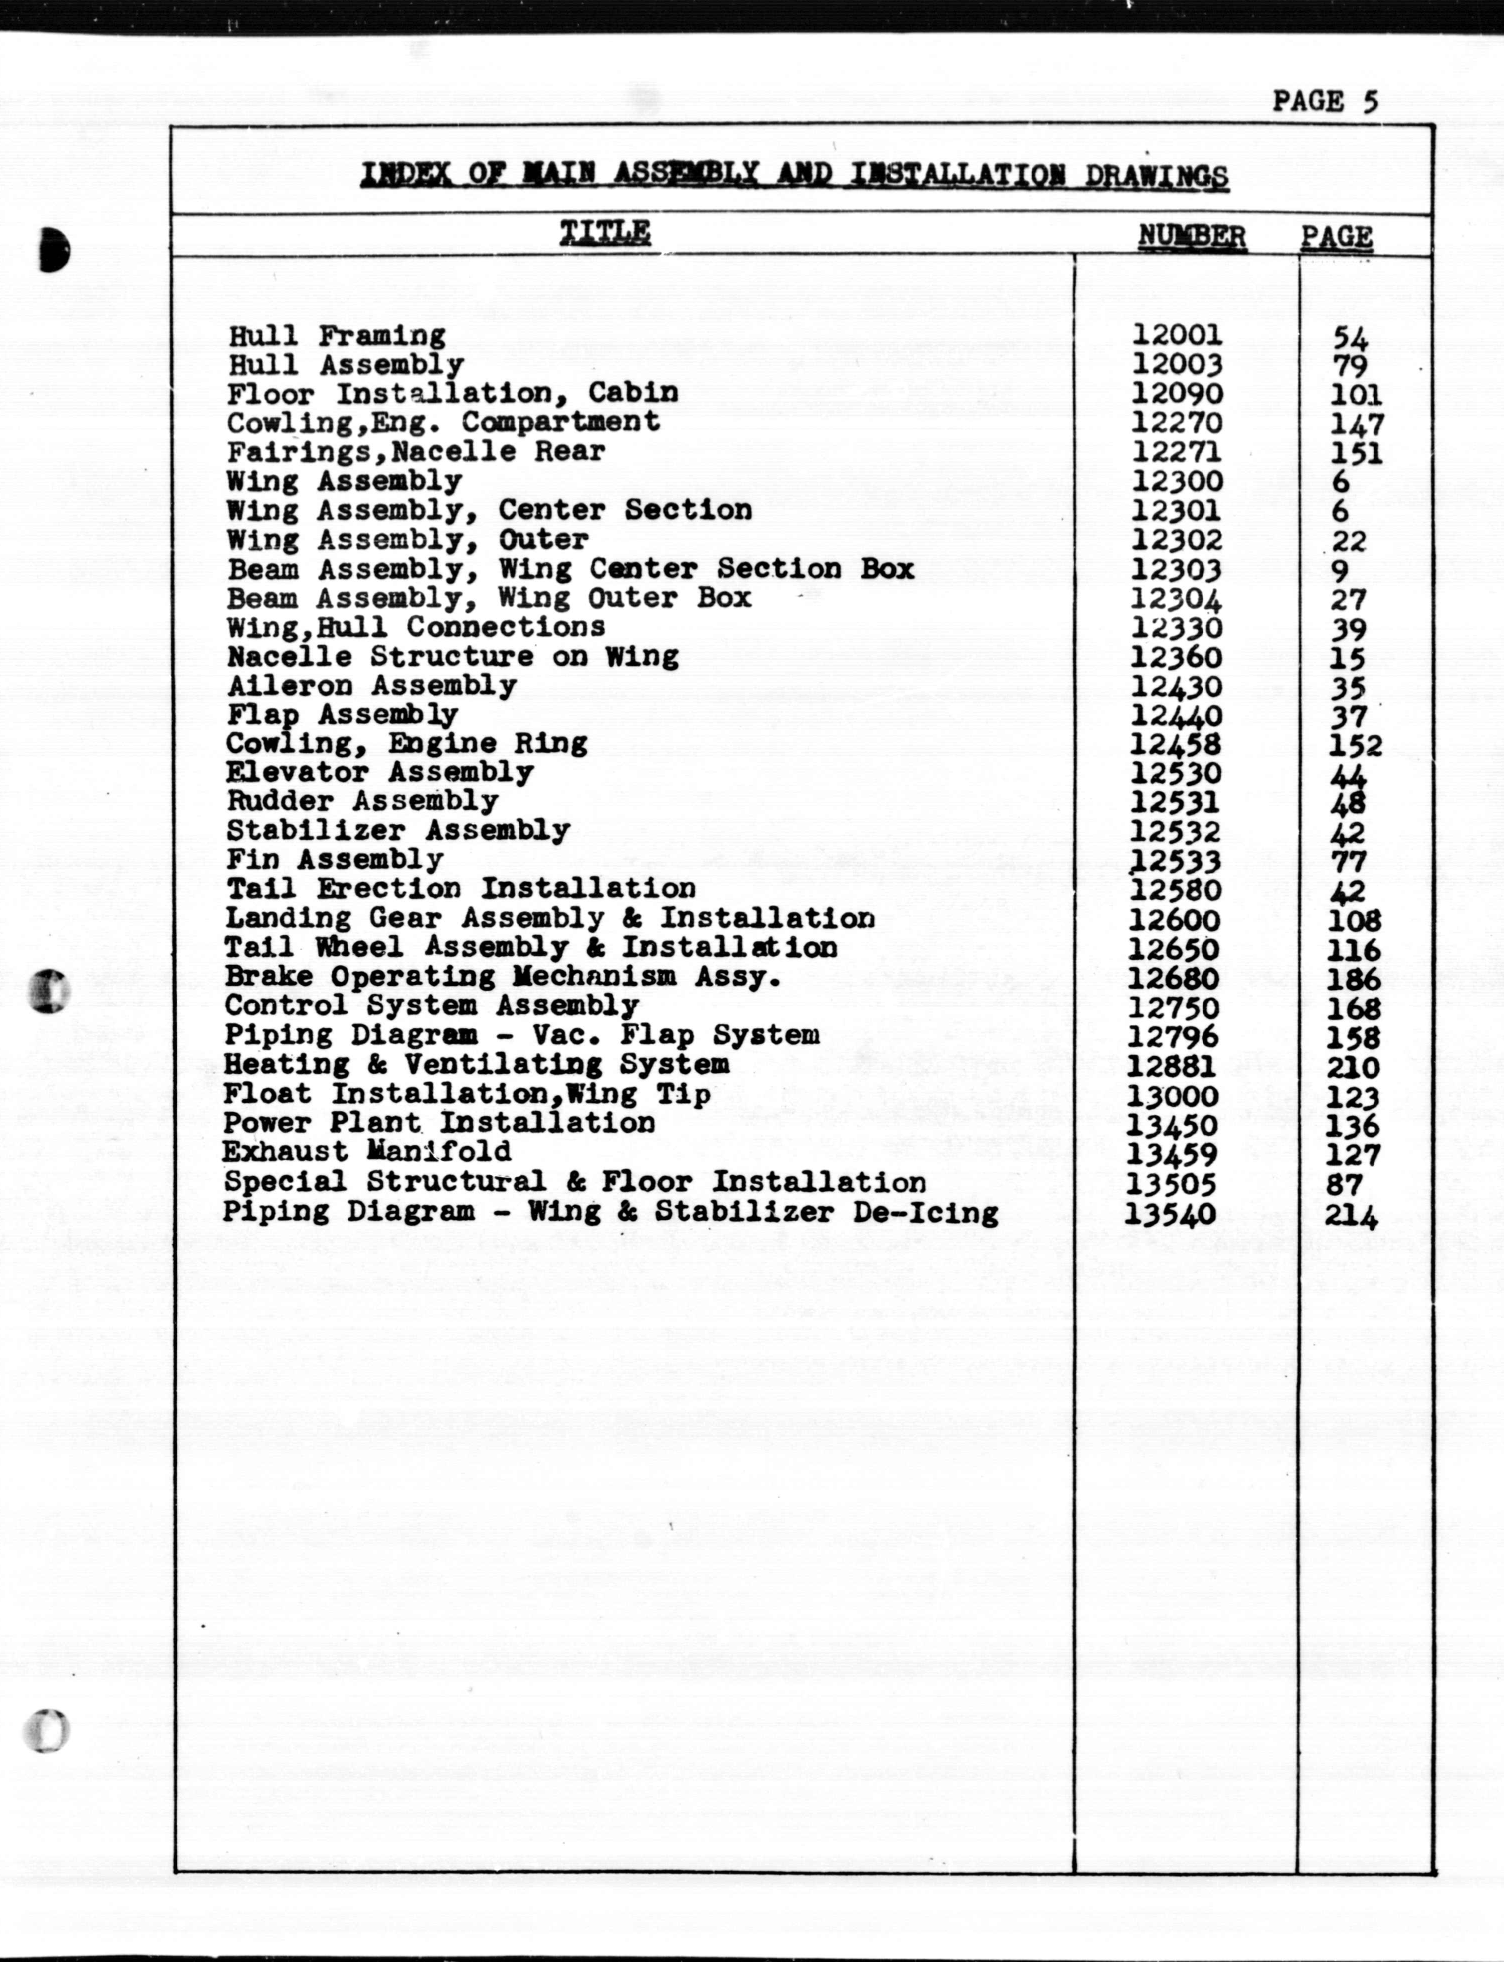 Sample page 5 from AirCorps Library document: Models JRF-1 & 1A Final Spare Parts List with Prices Contract No. 66303